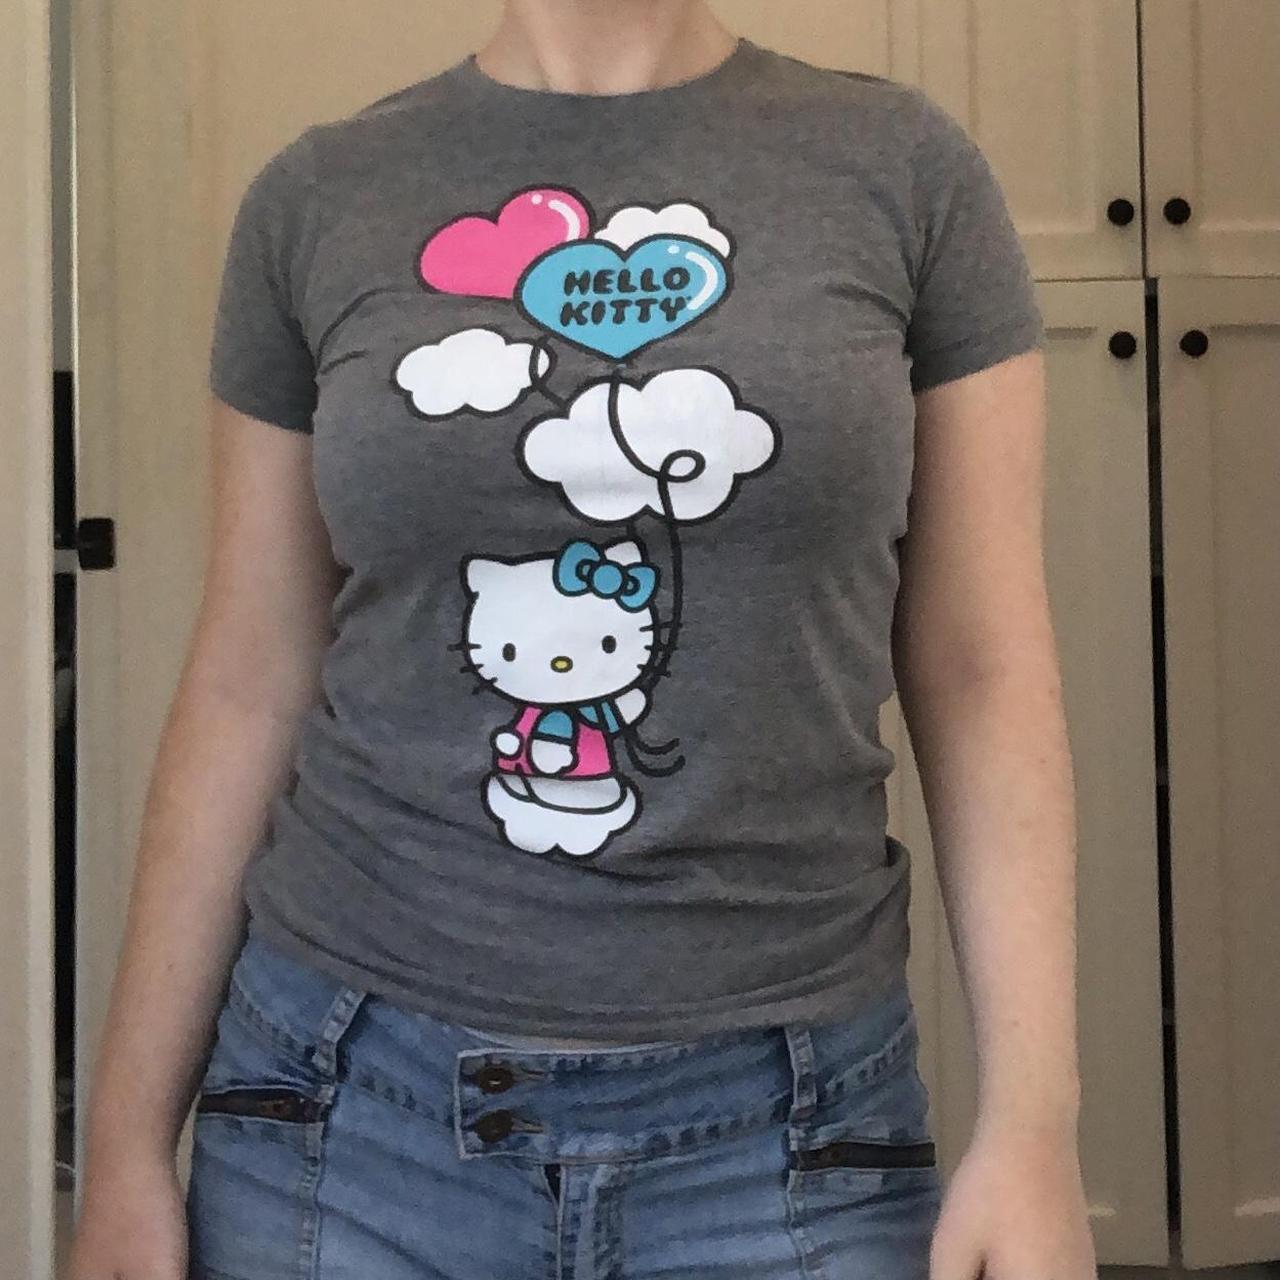 Hello Kitty Graphic Shirt In amazing pre-loved - Depop